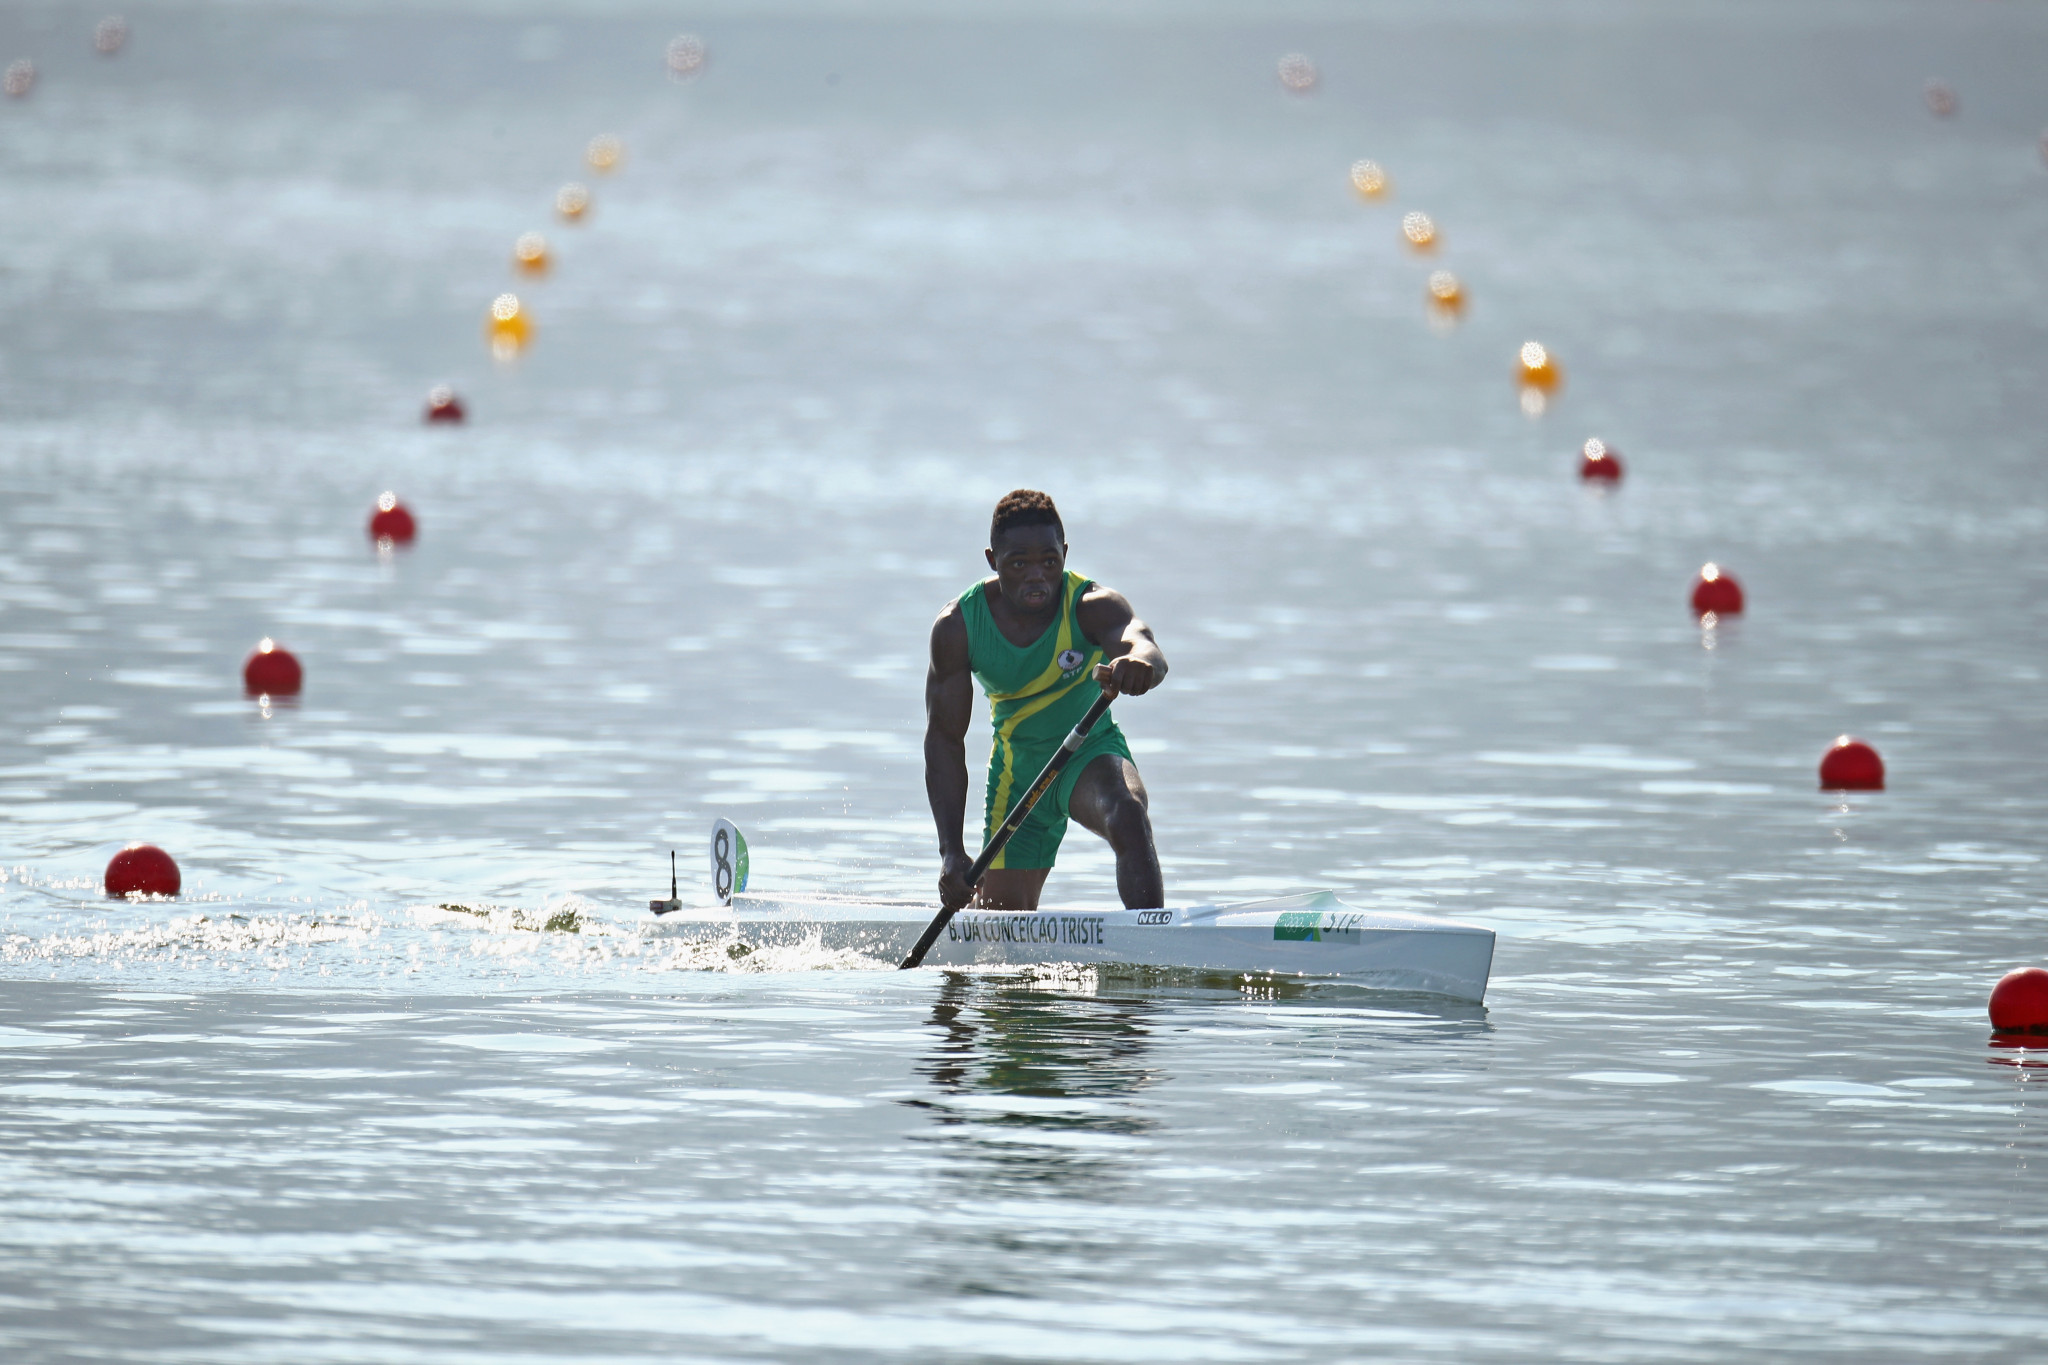  Buly Triste represented São Tomé and Príncipe at the Rio 2016 in canoe sprint ©Getty Images